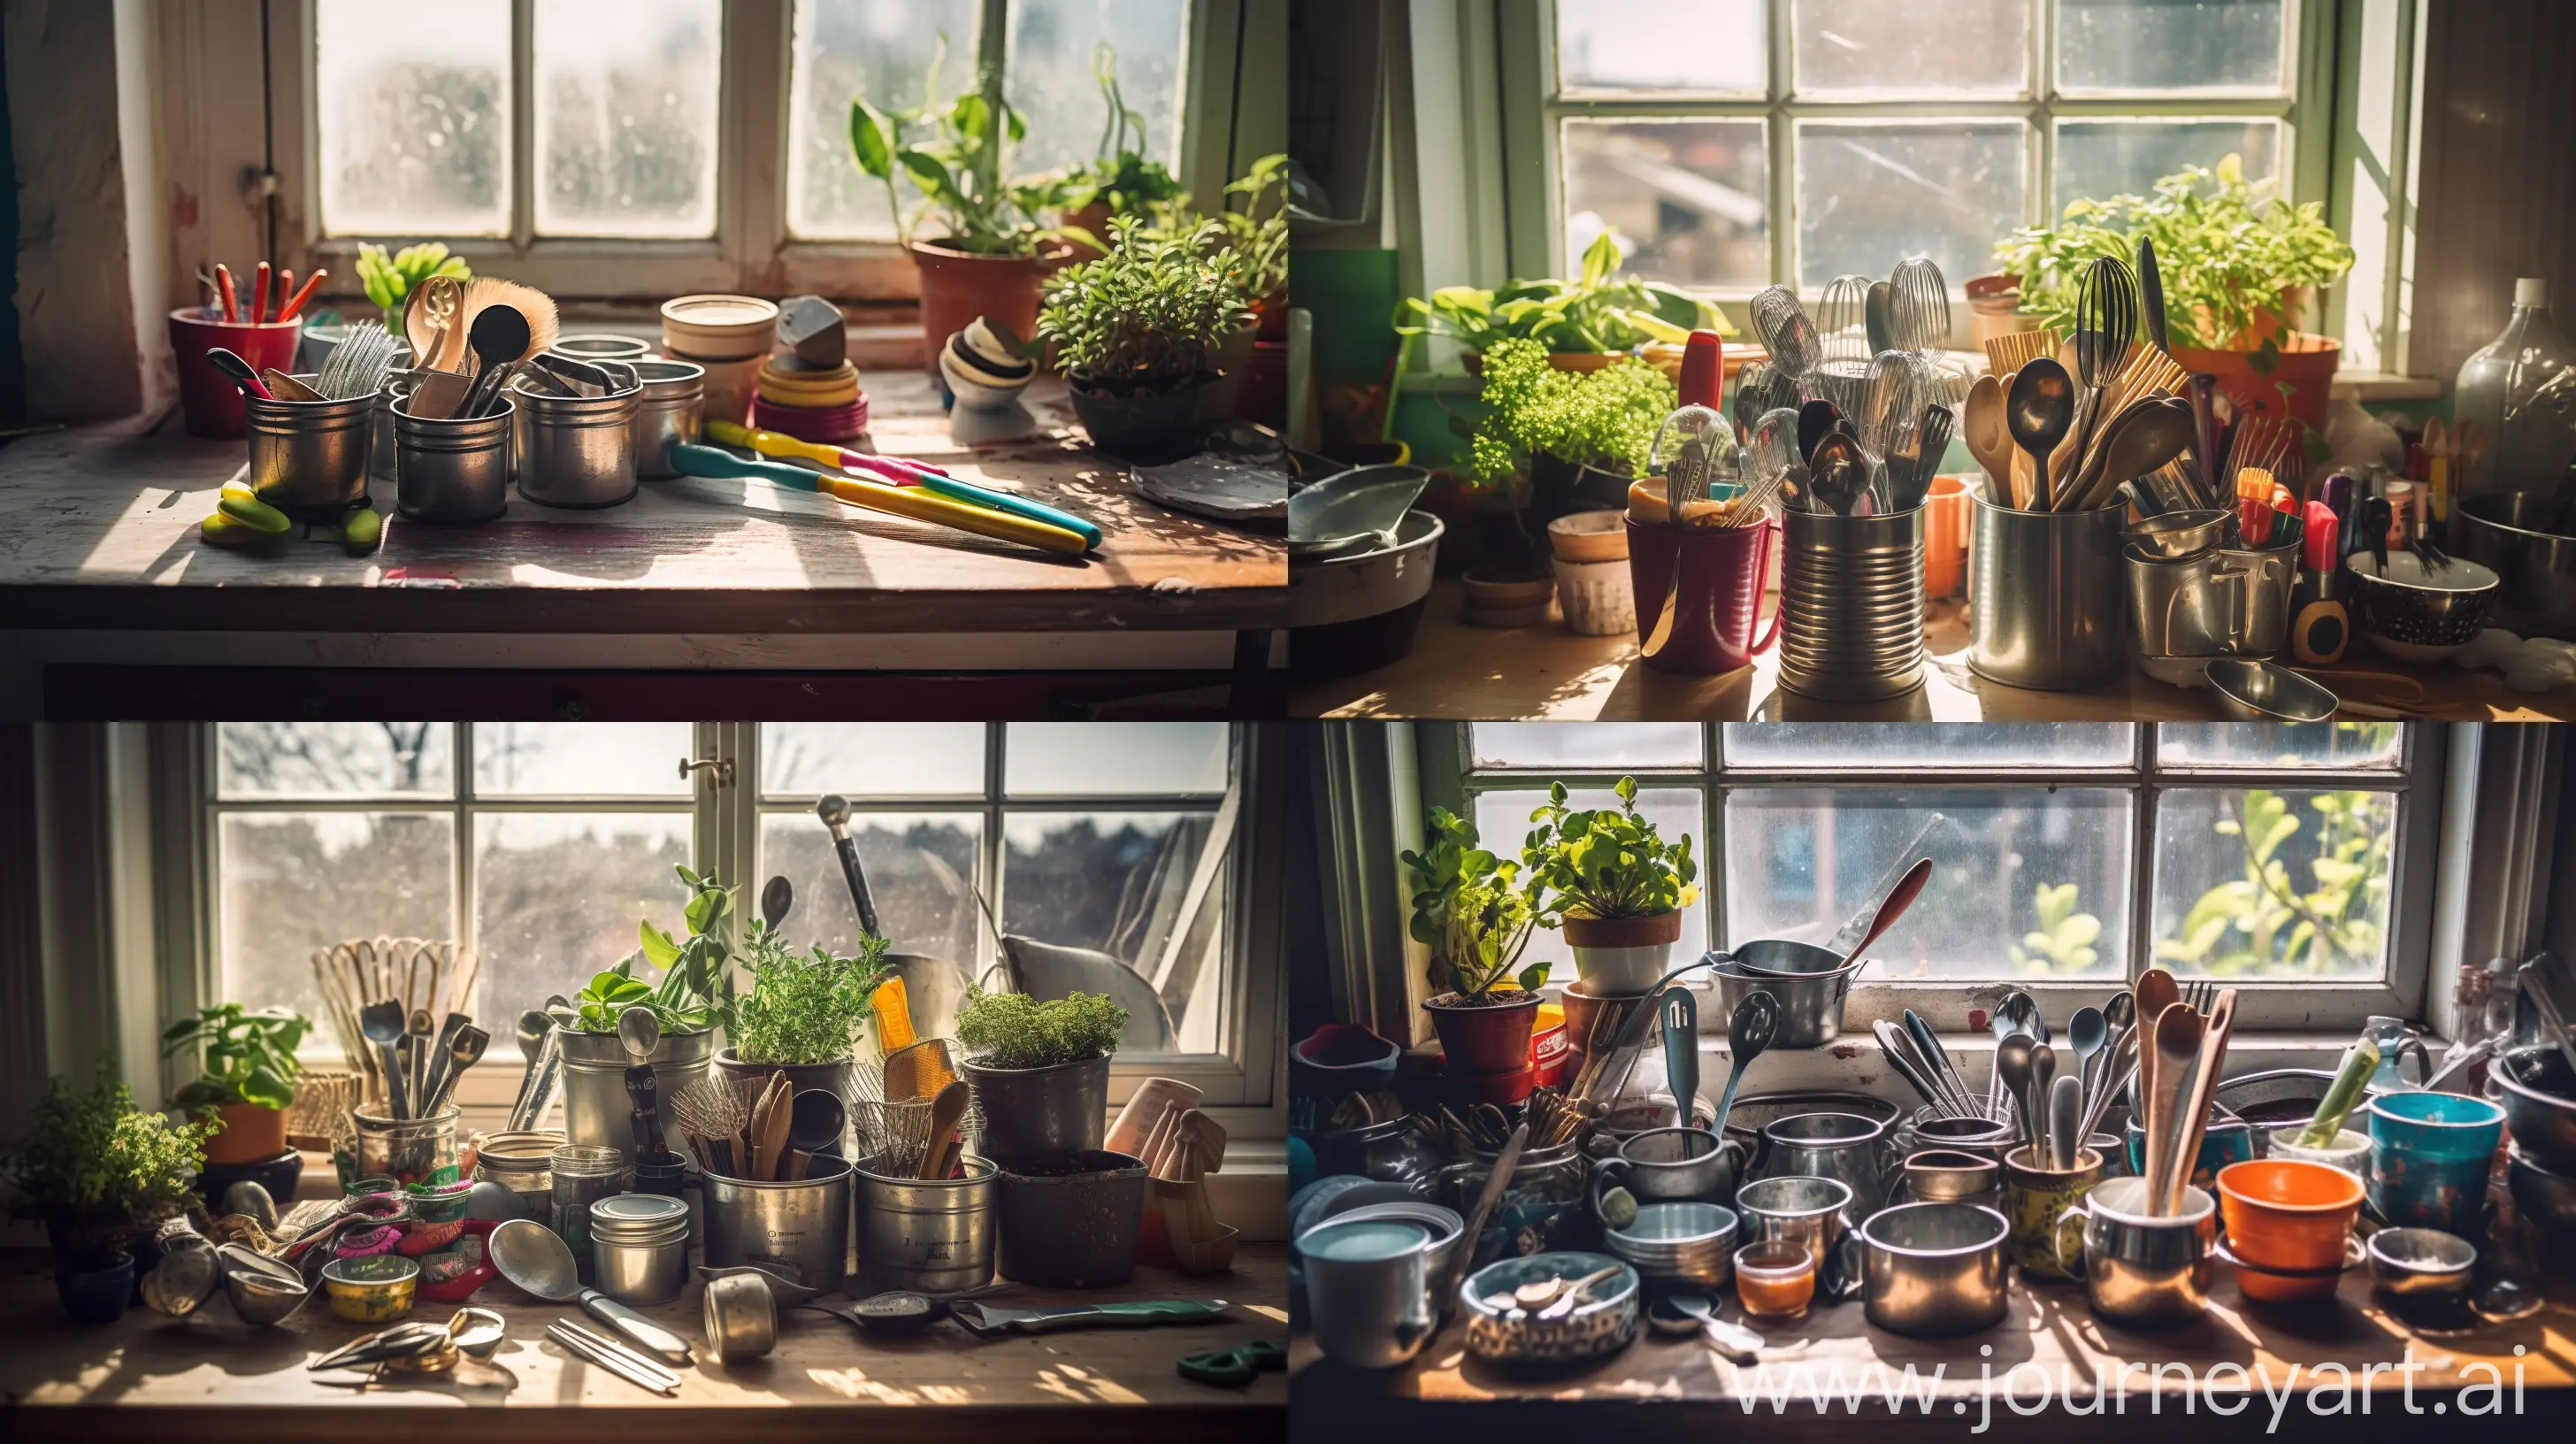 Creative ways to upcycle kitchen items, turning old utensils into vibrant plant pots, each utensil uniquely repurposed, arranged on a sunlit windowsill, showcasing the diversity of transformed items, Photography, DSLR with a 50mm prime lens, natural light, --ar 16:9 --v 5